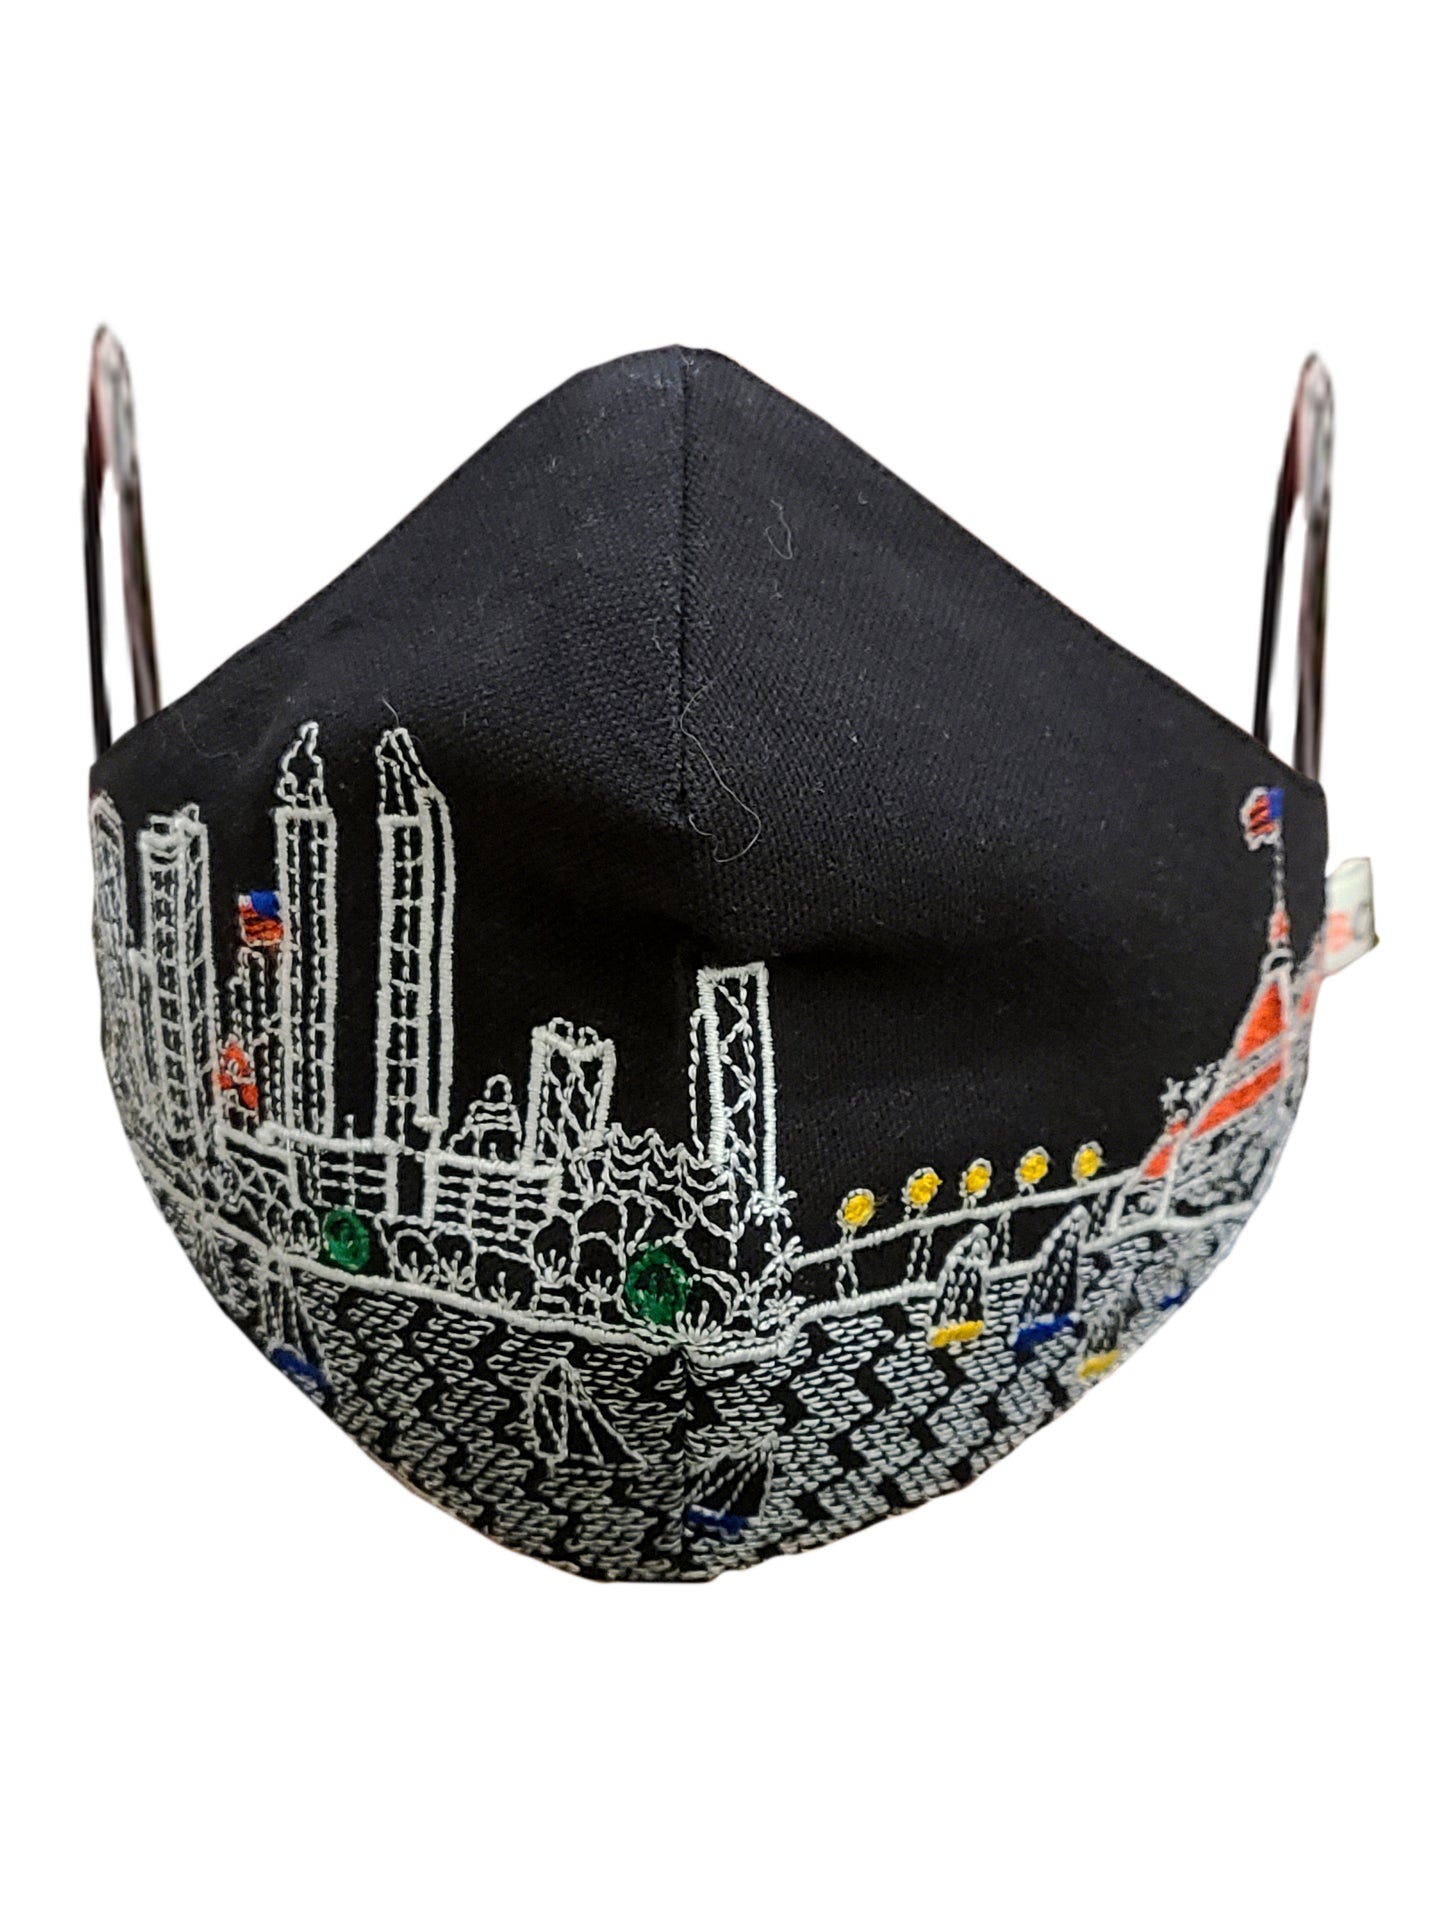 SAN DIEGO EMBROIDERED SKYLINE FACE MASK